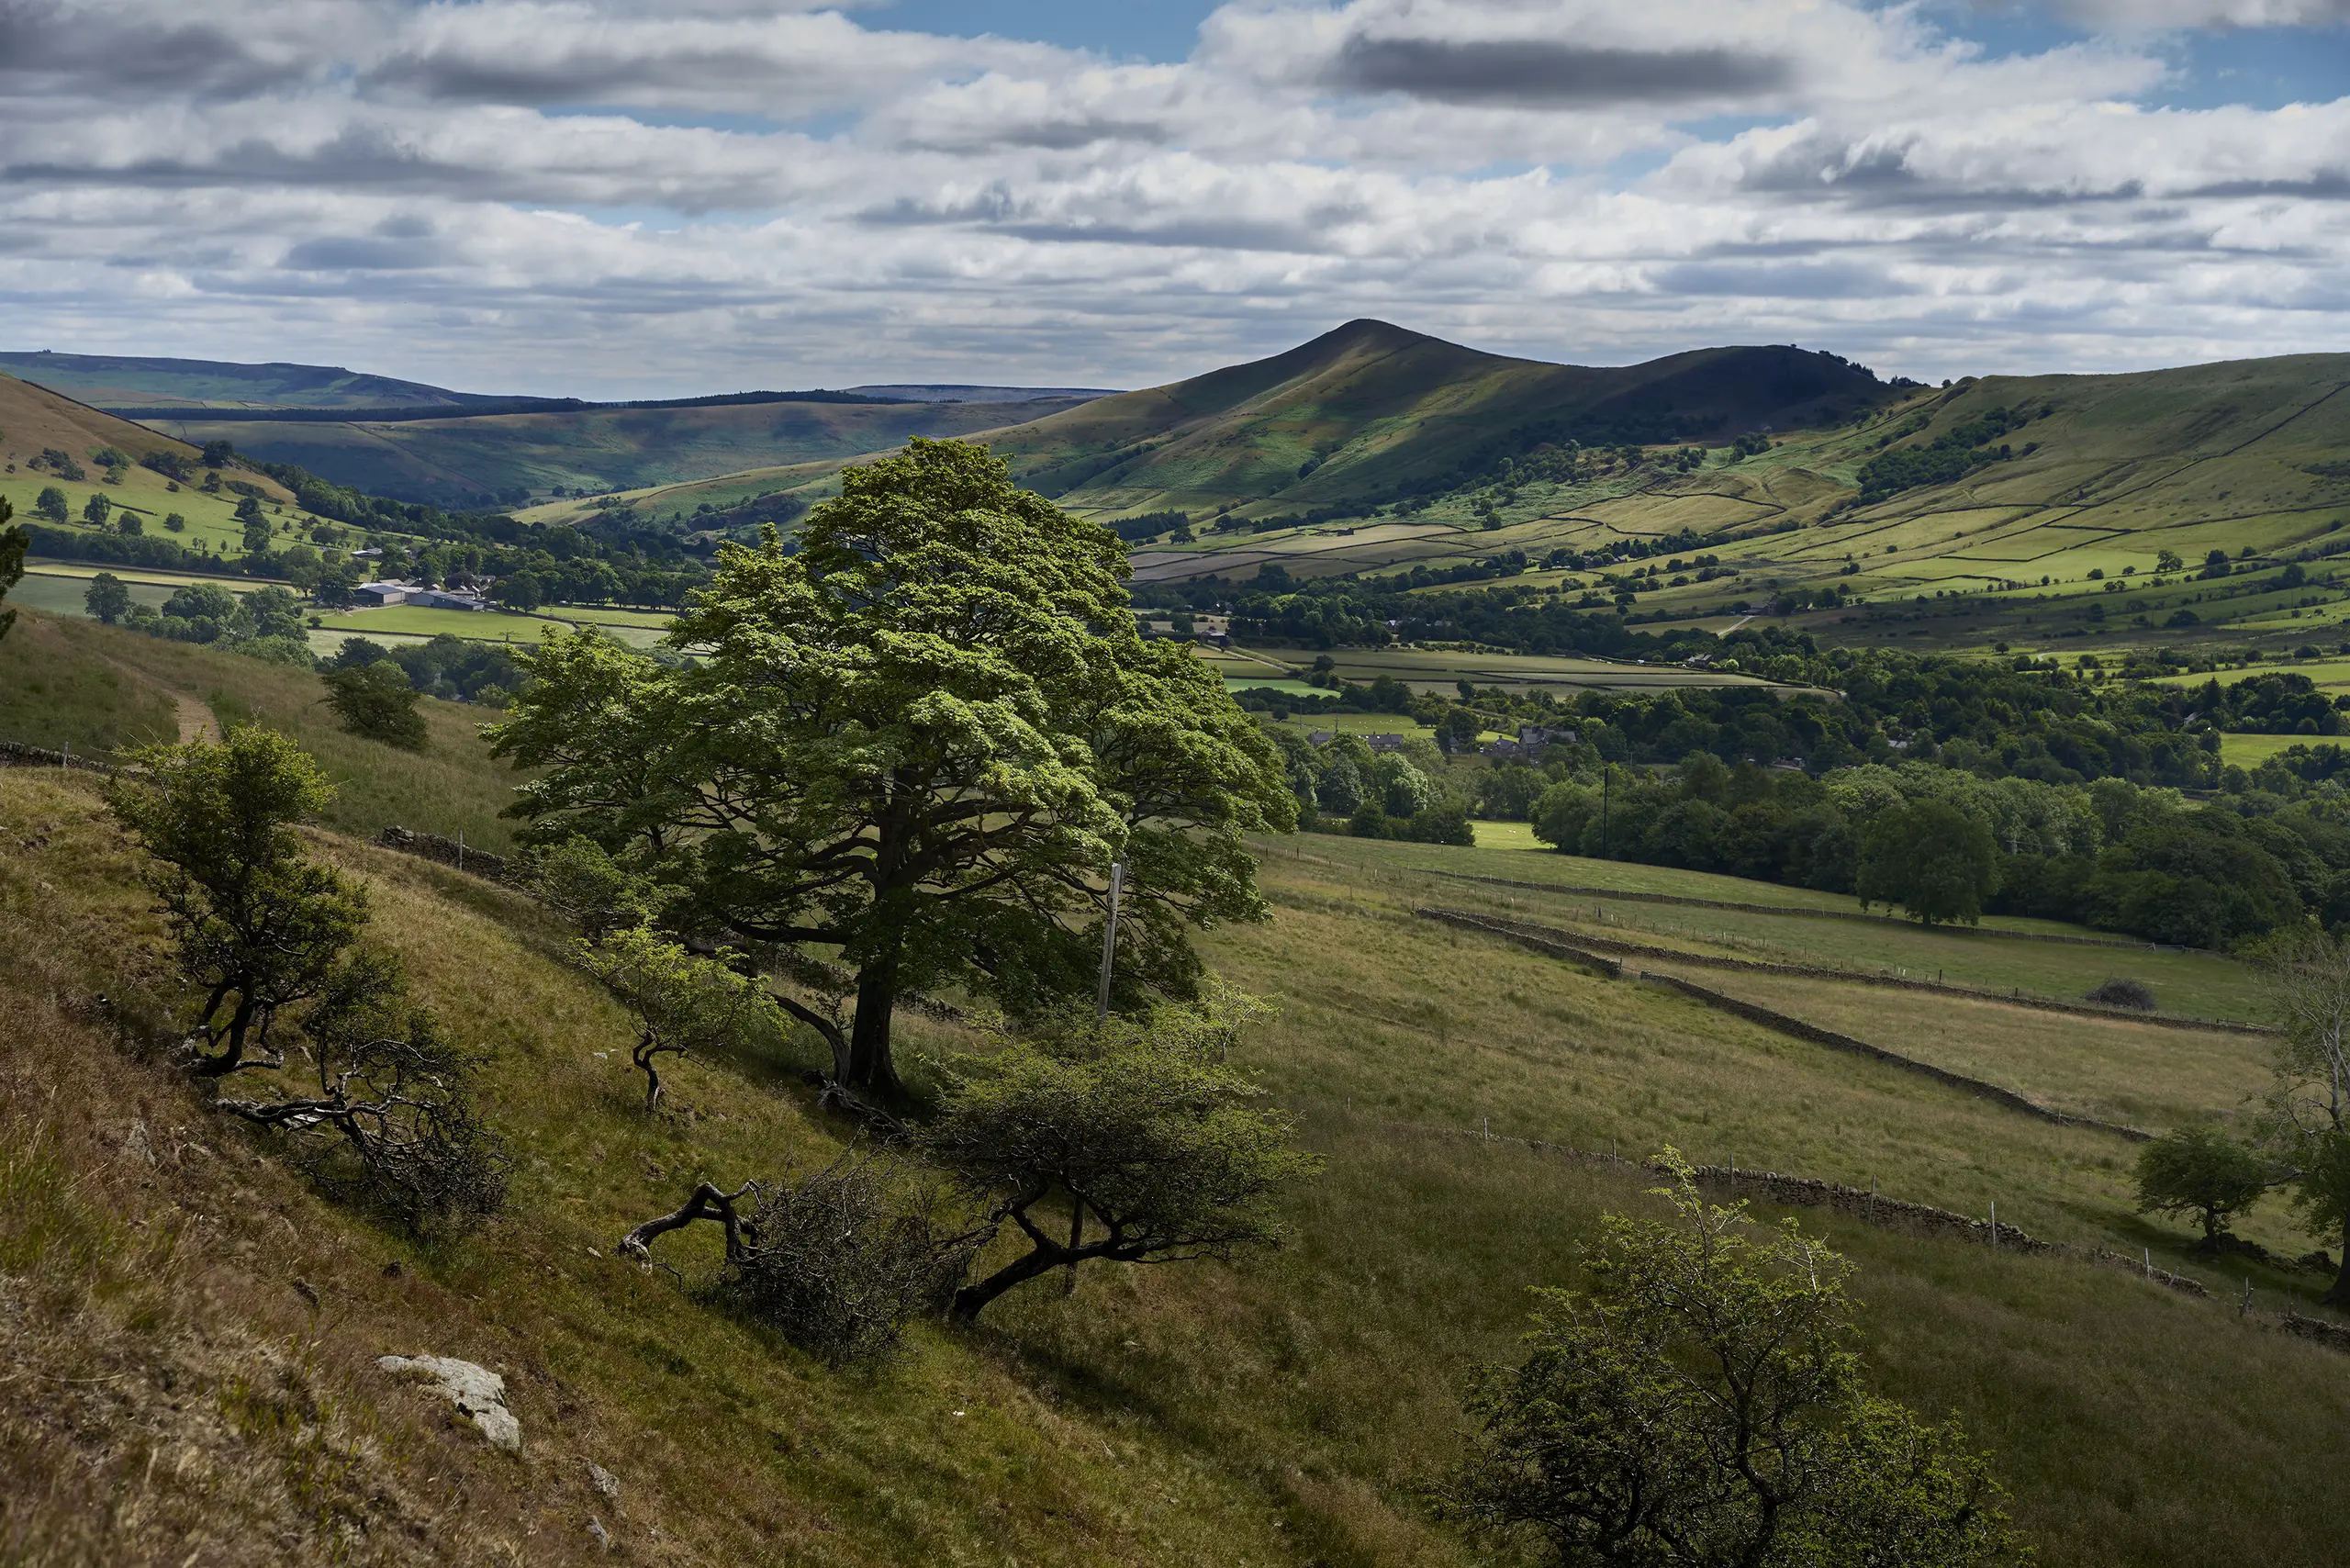 Edale with Lose Hill in the background